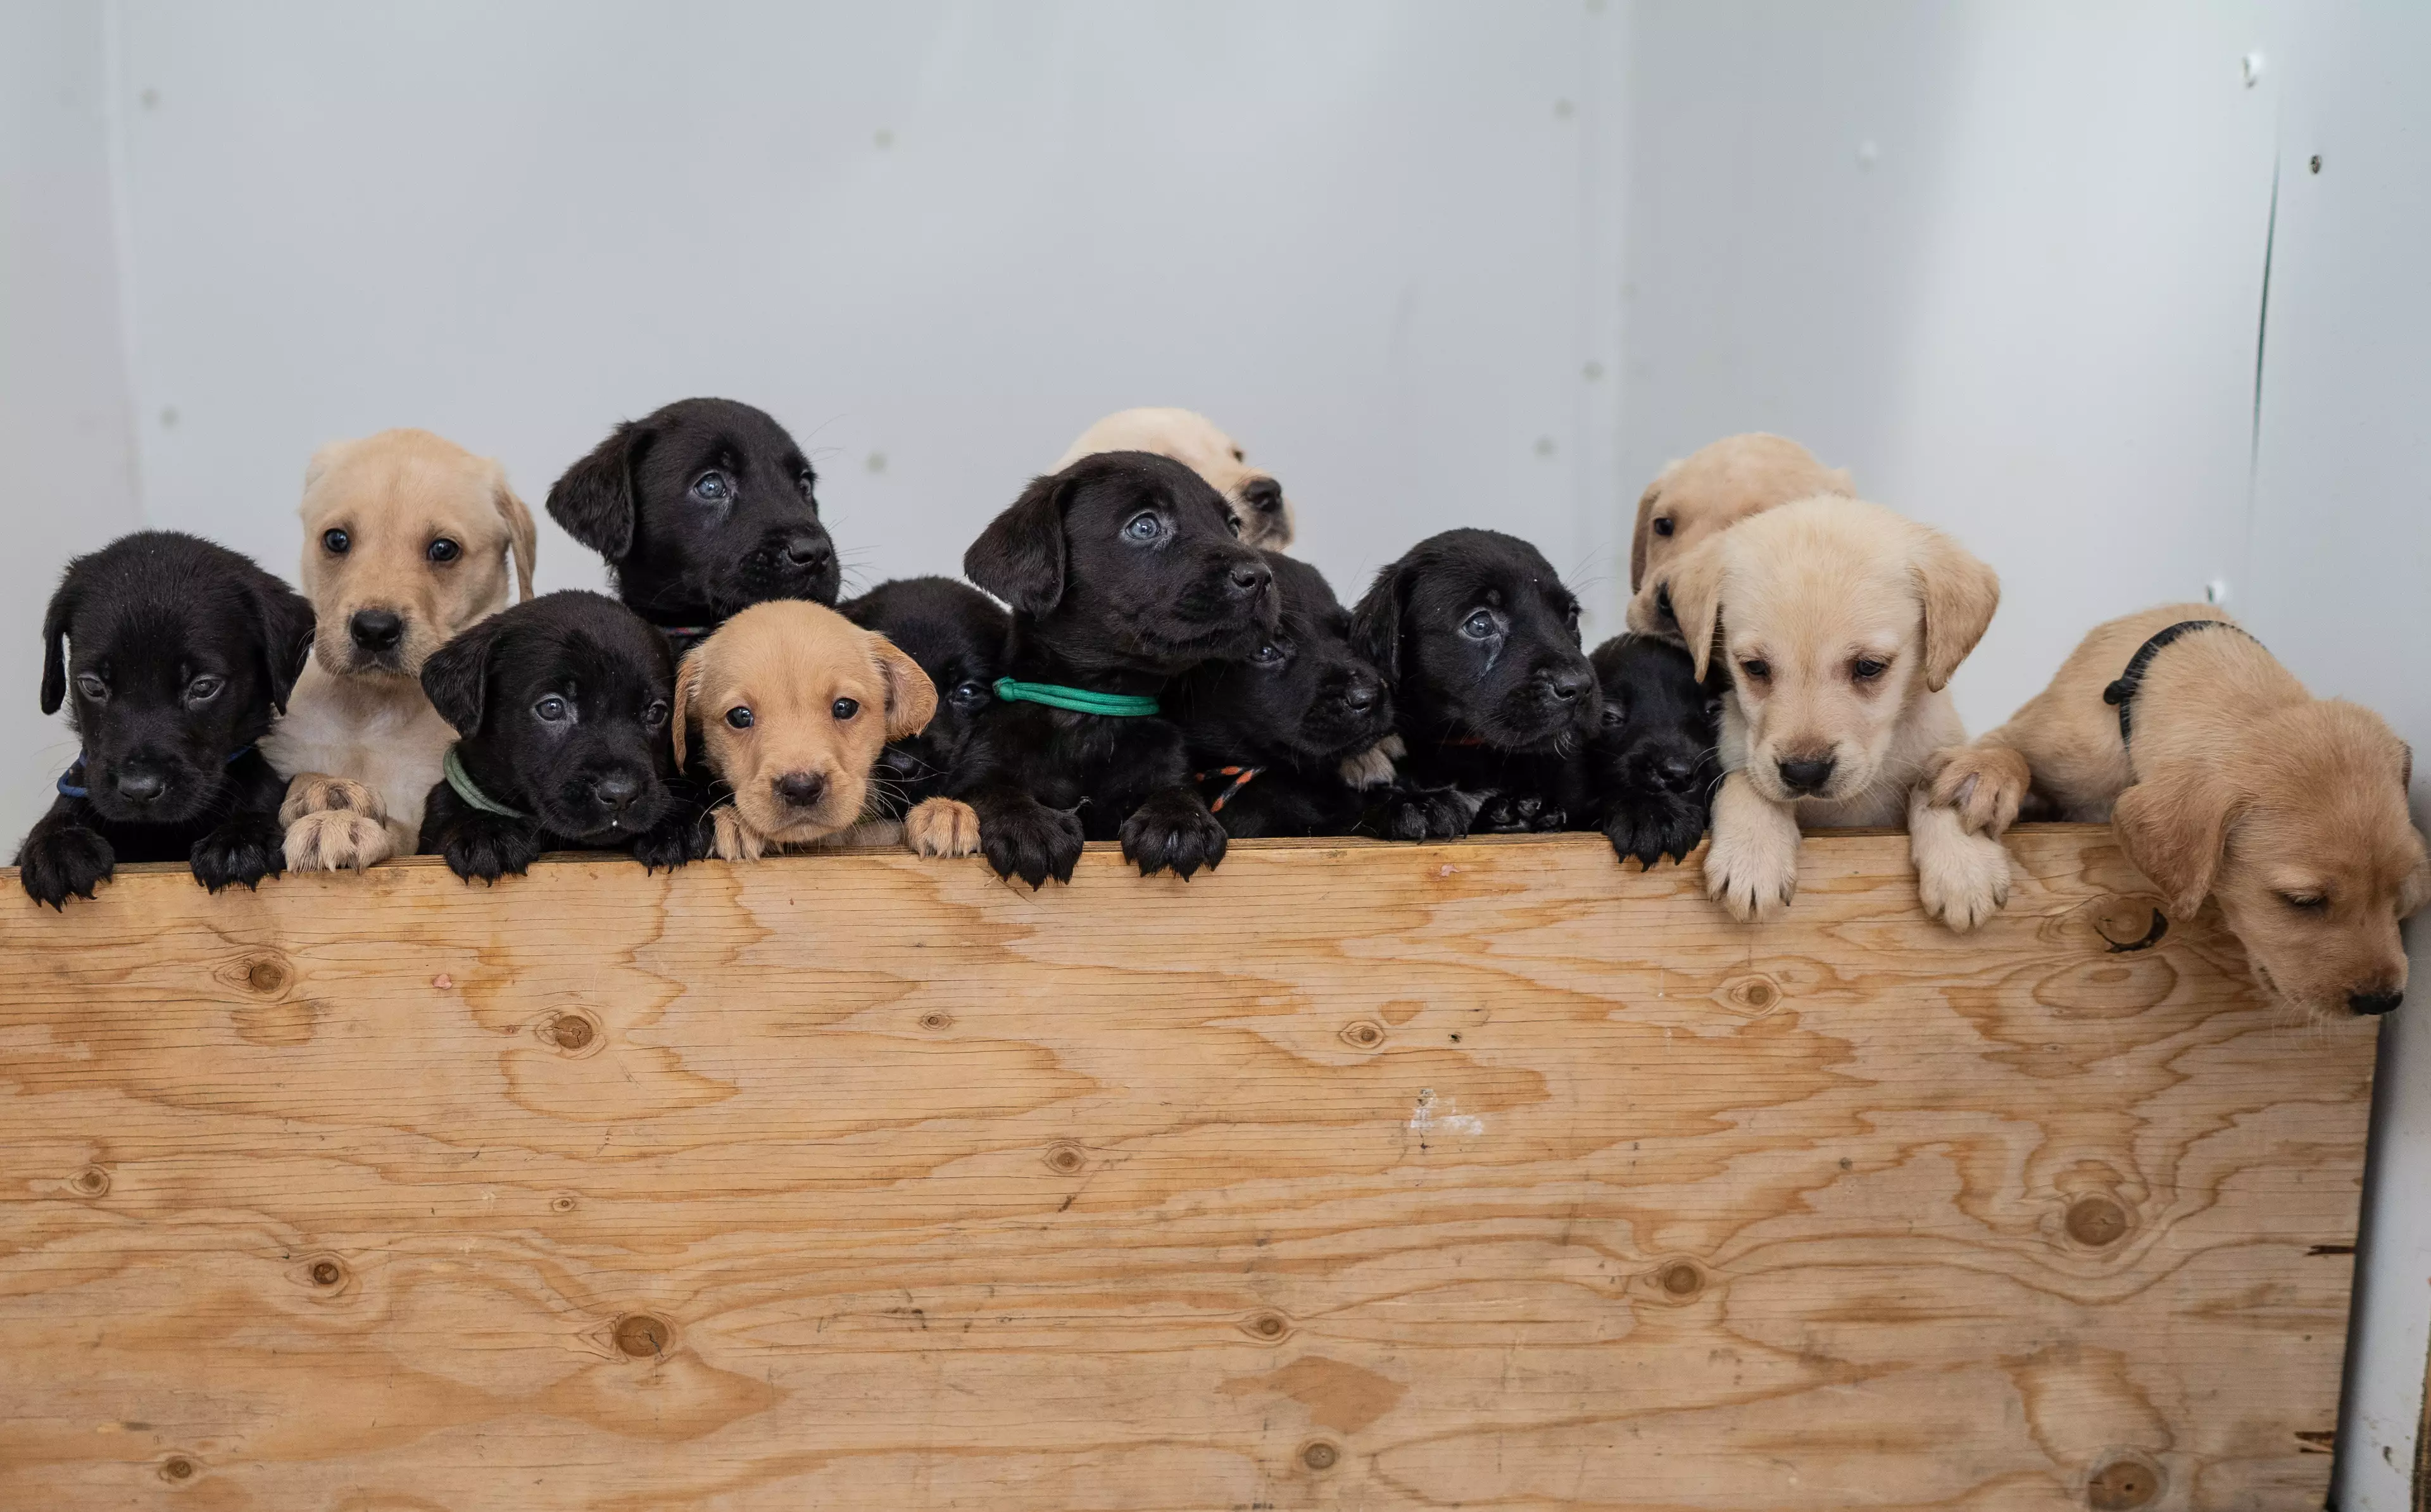 Bella's last ever litter was a mixture of black and yellow puppies.